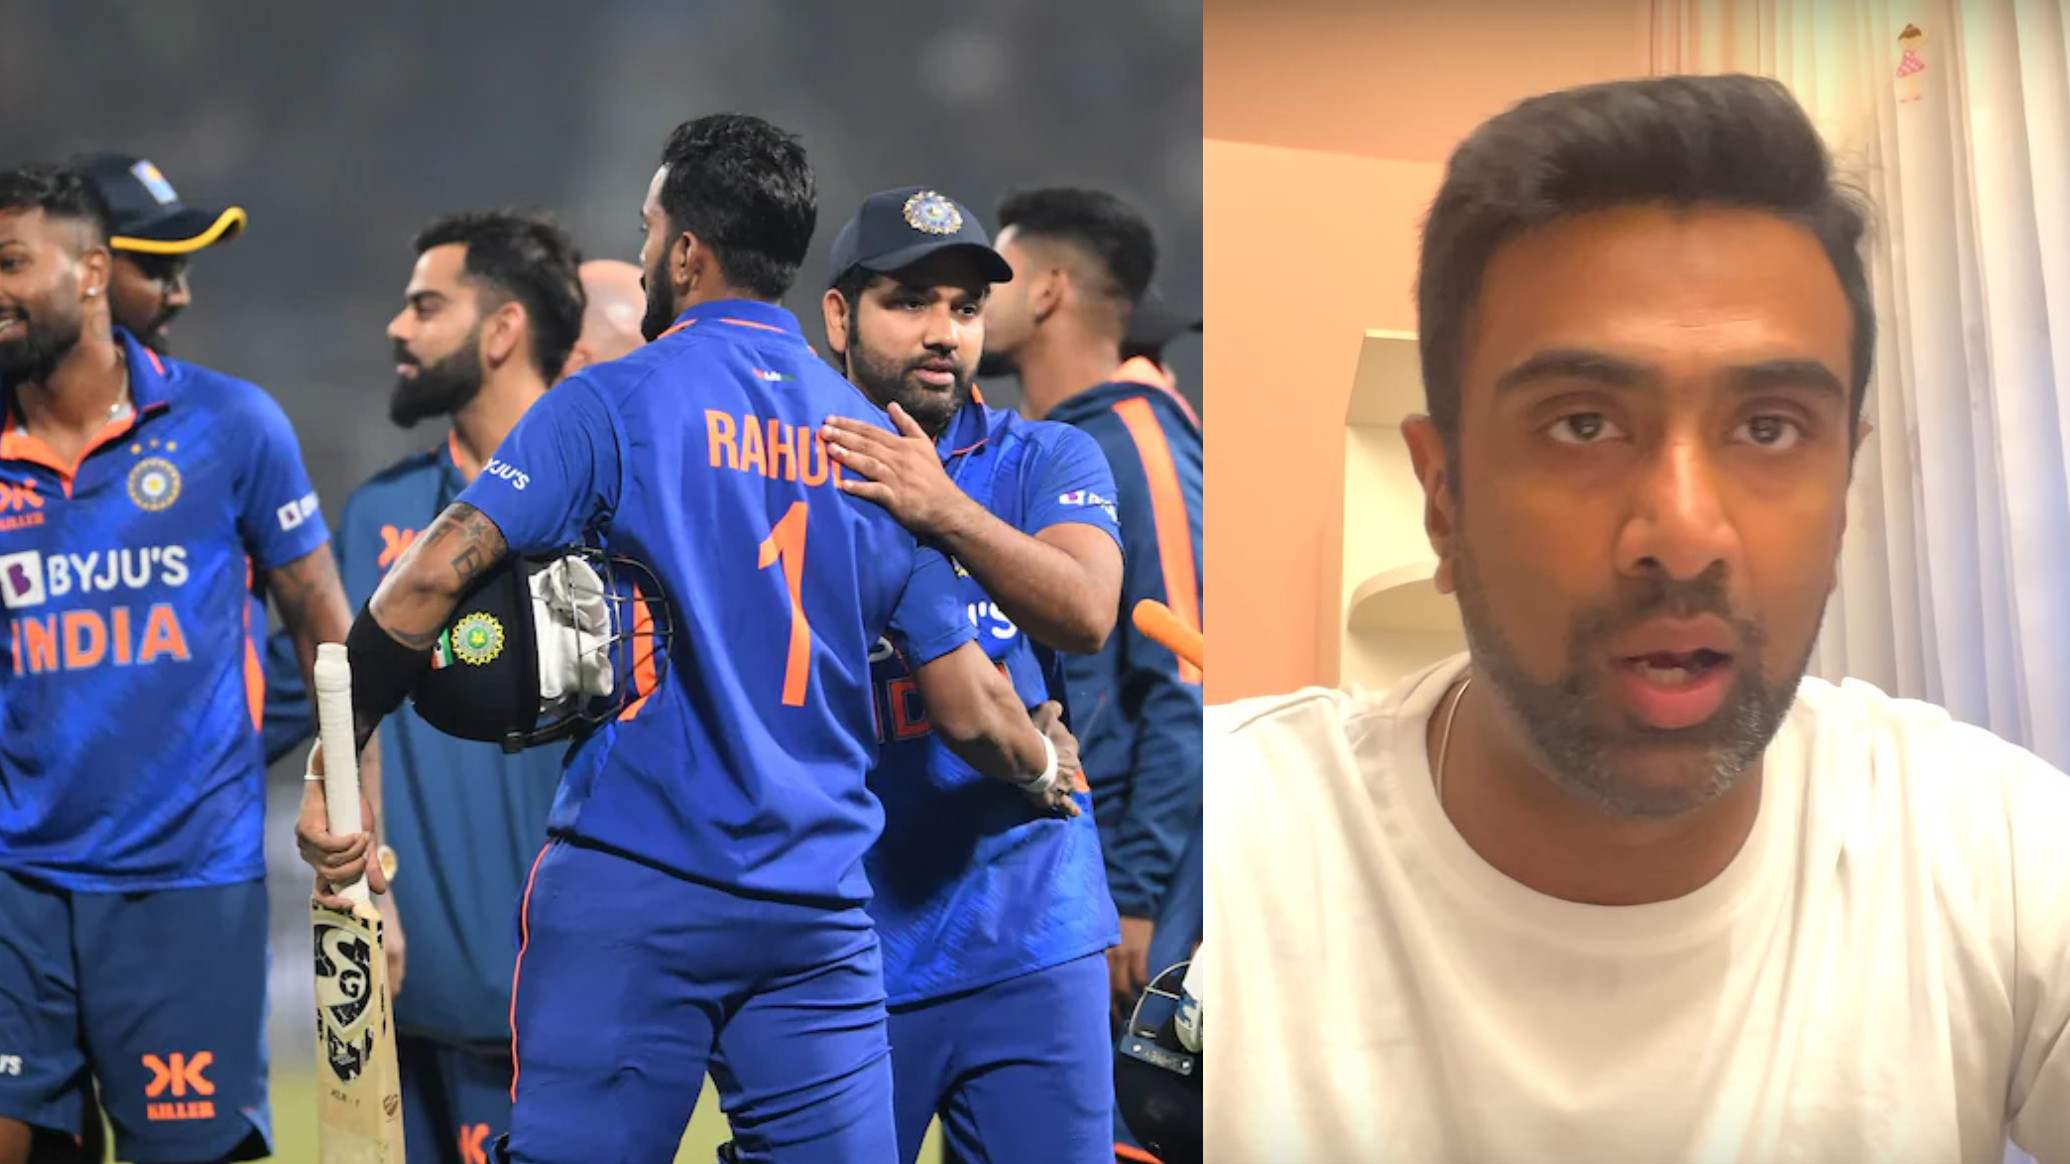 CWC 2023: “India do start as favorites ahead of this 2023 World Cup”- R Ashwin